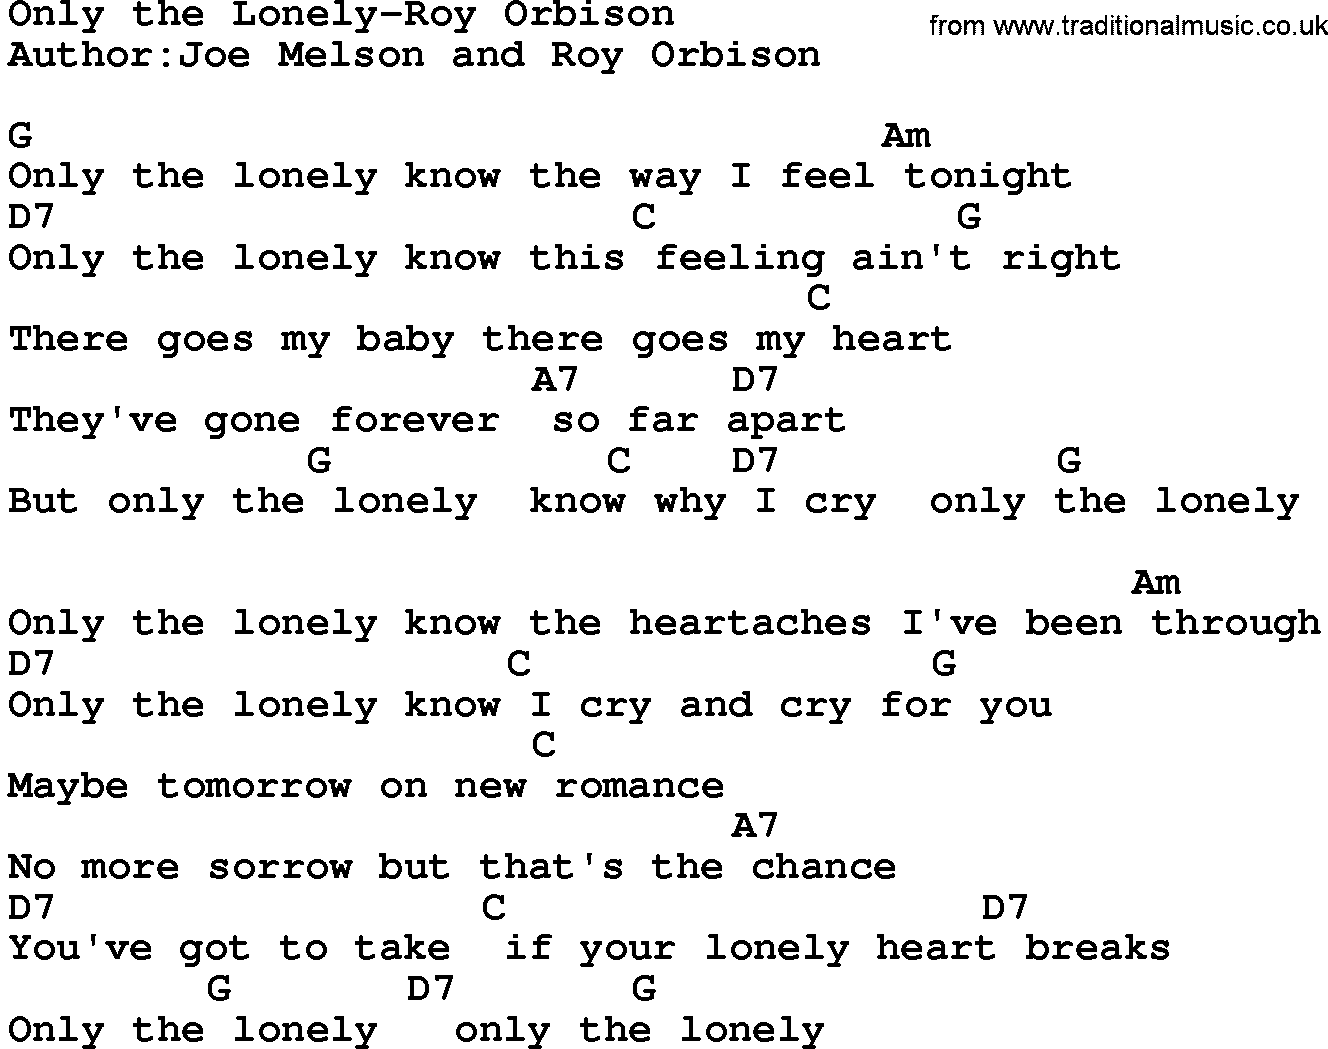 Country music song: Only The Lonely-Roy Orbison lyrics and chords